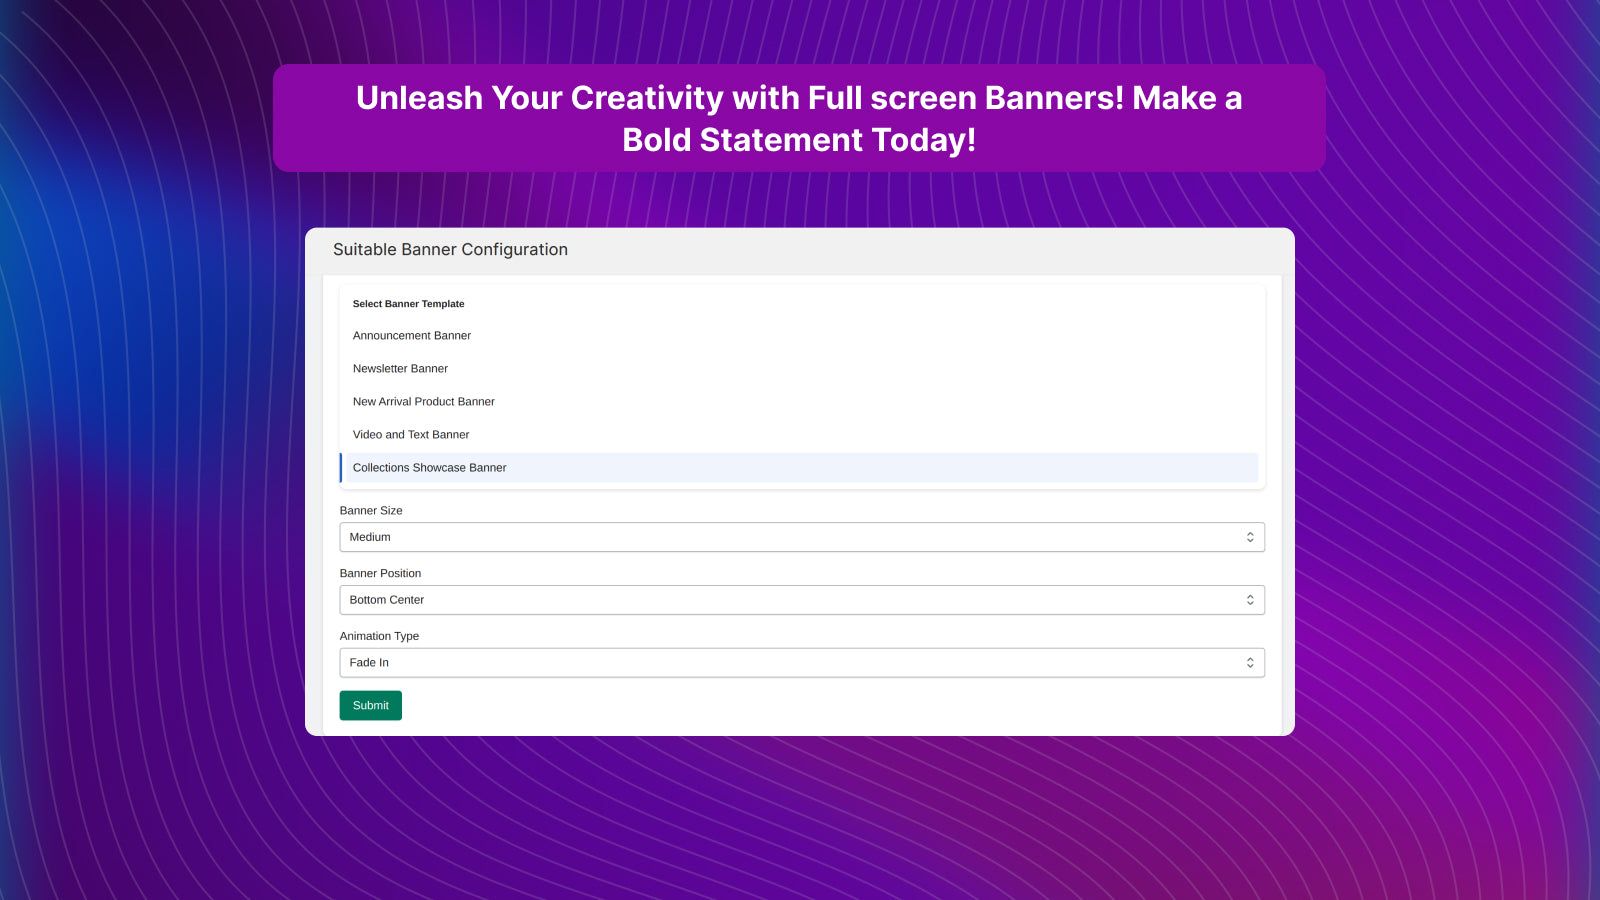 Create banner suitable options